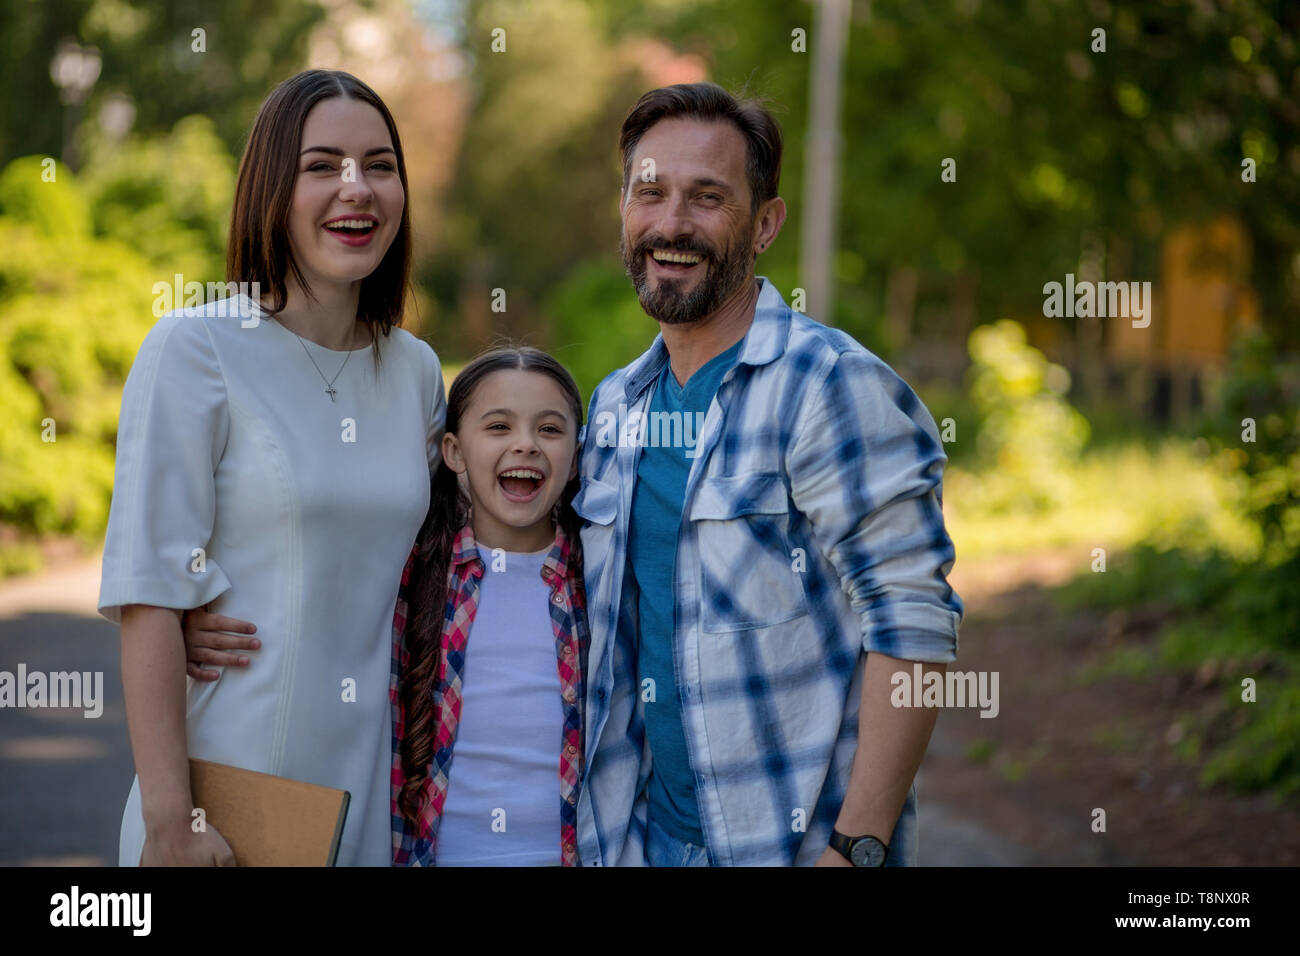 Smiling Happy Family In The Park. Mother Father And Daughter In Casual Clothes. The Daughter Is Hugging Her Parents. Stock Photo